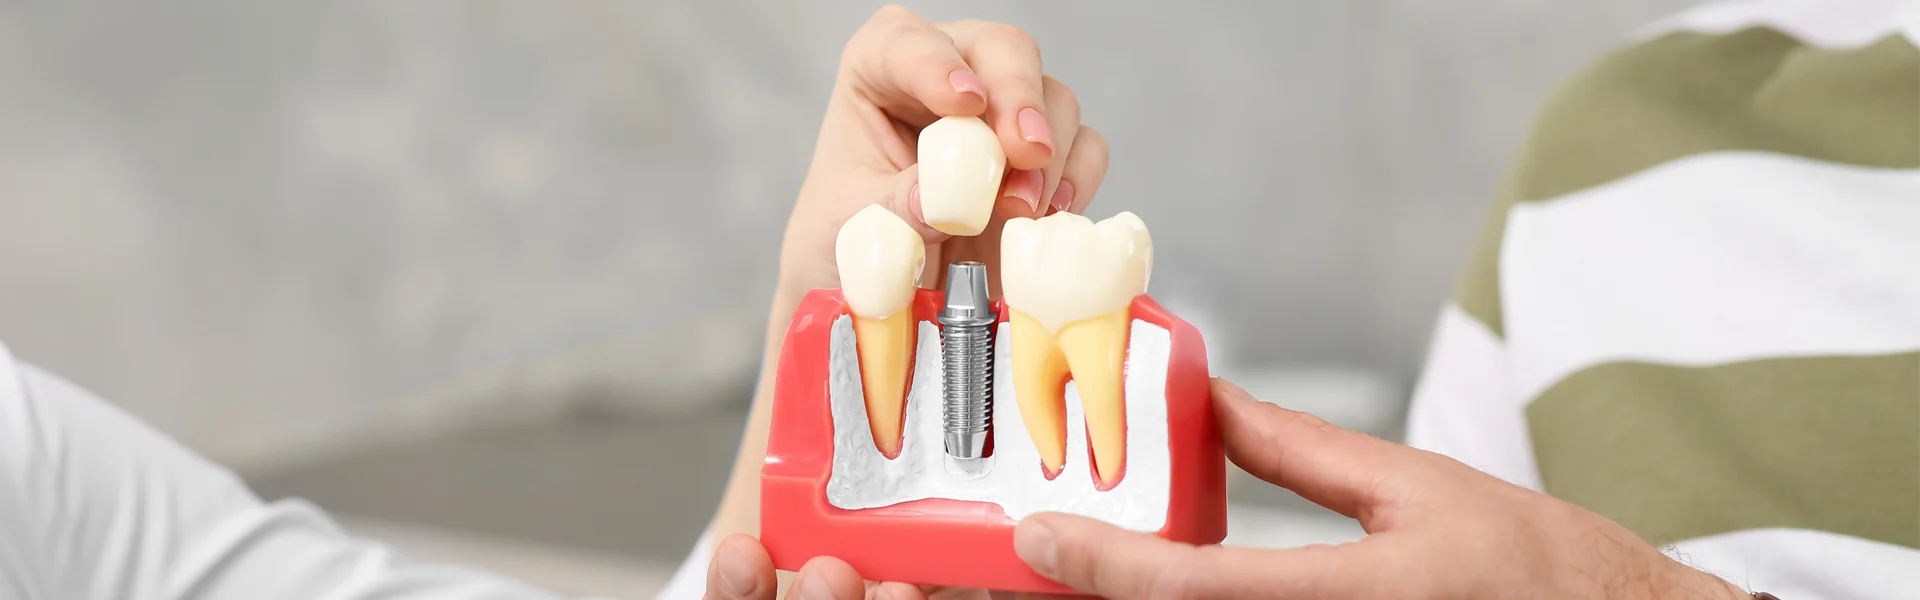 Top 10 Important Facts About Dental Implants